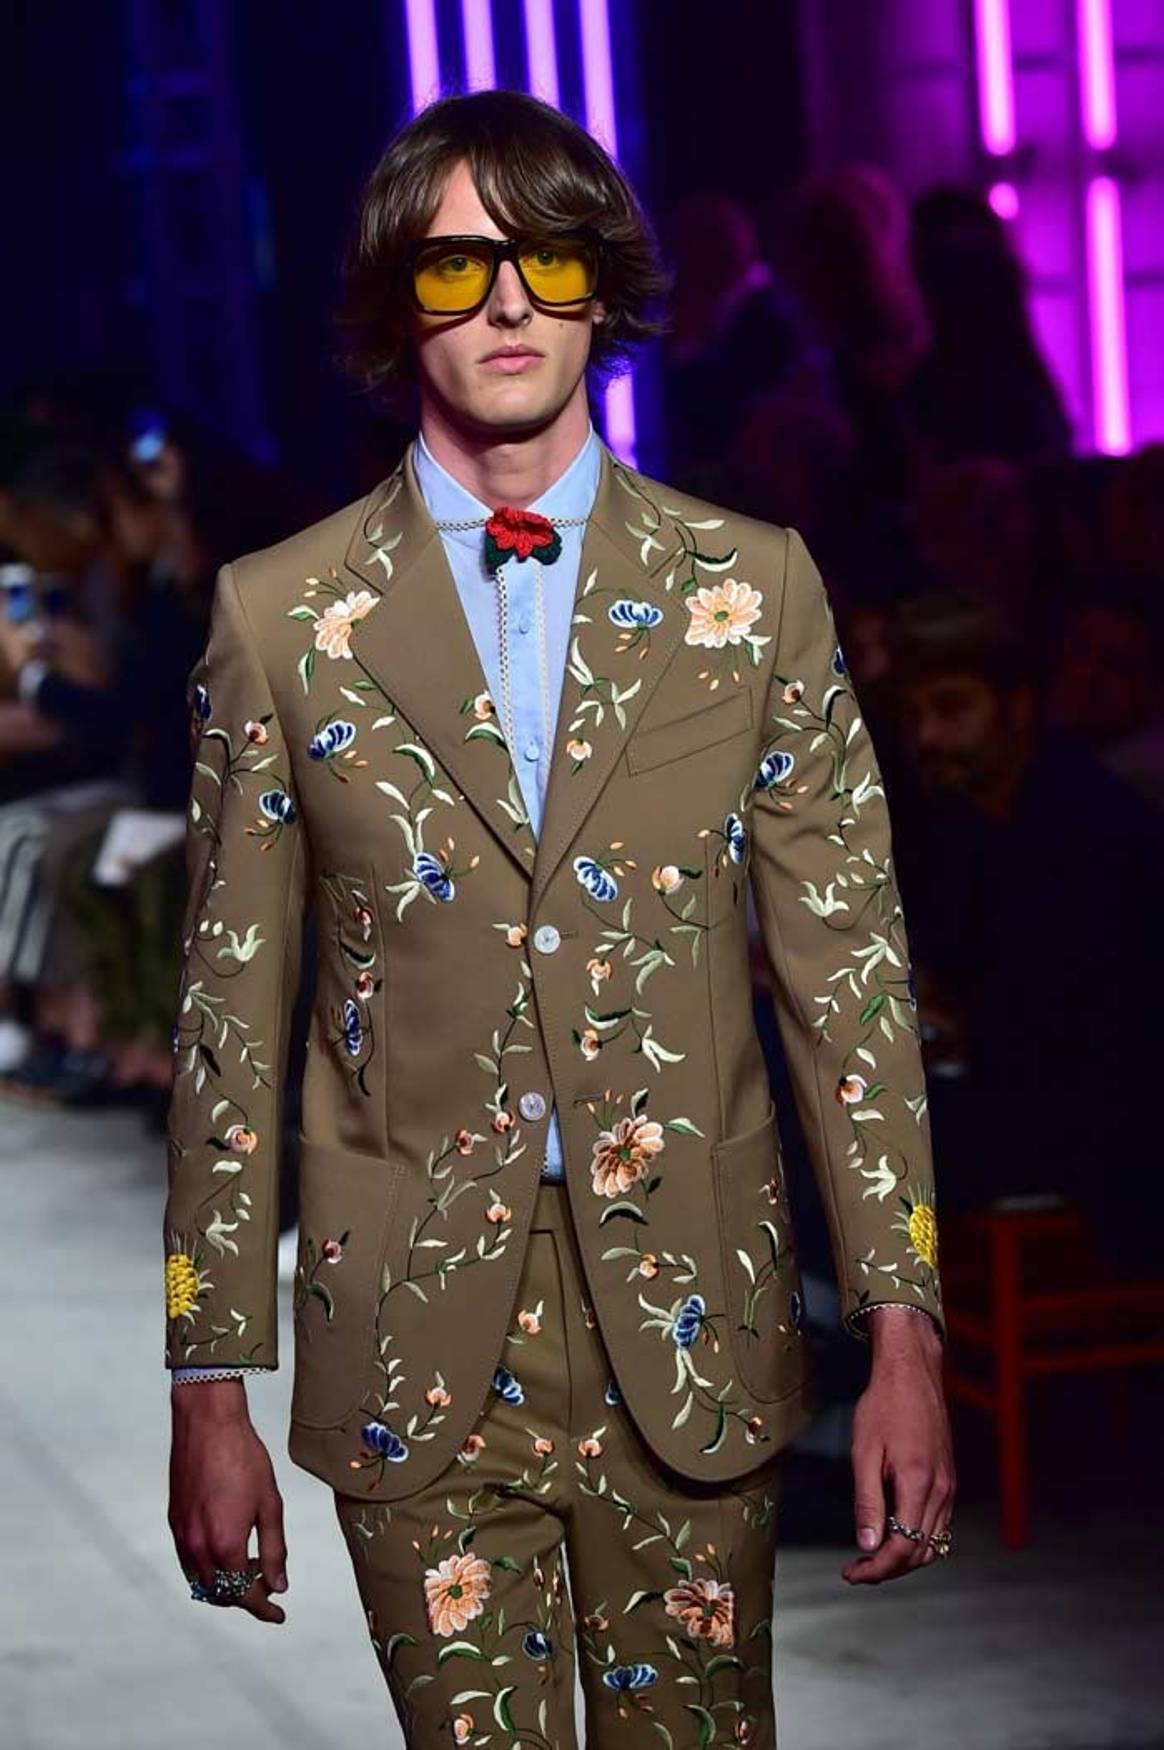 Gucci sets tone for 2016 with its 'Summer of Love'